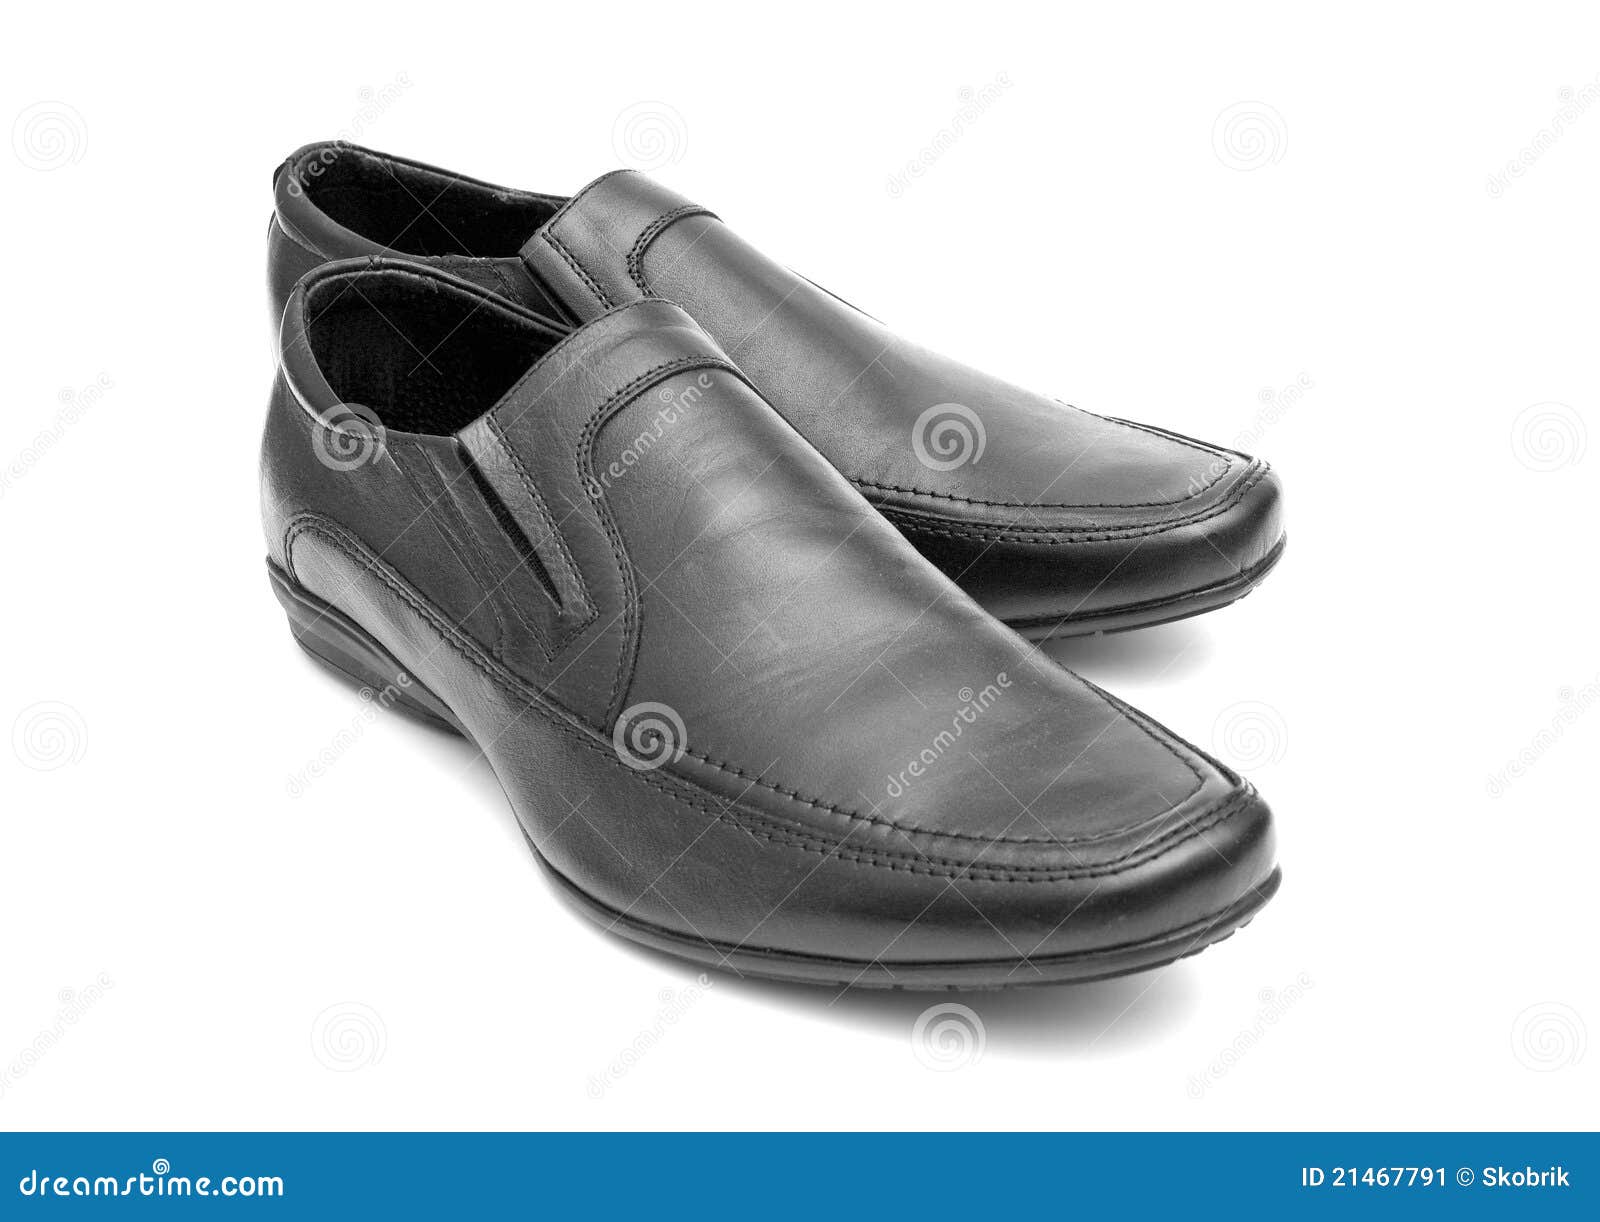 Pair of black man s shoes stock image. Image of attractive - 21467791